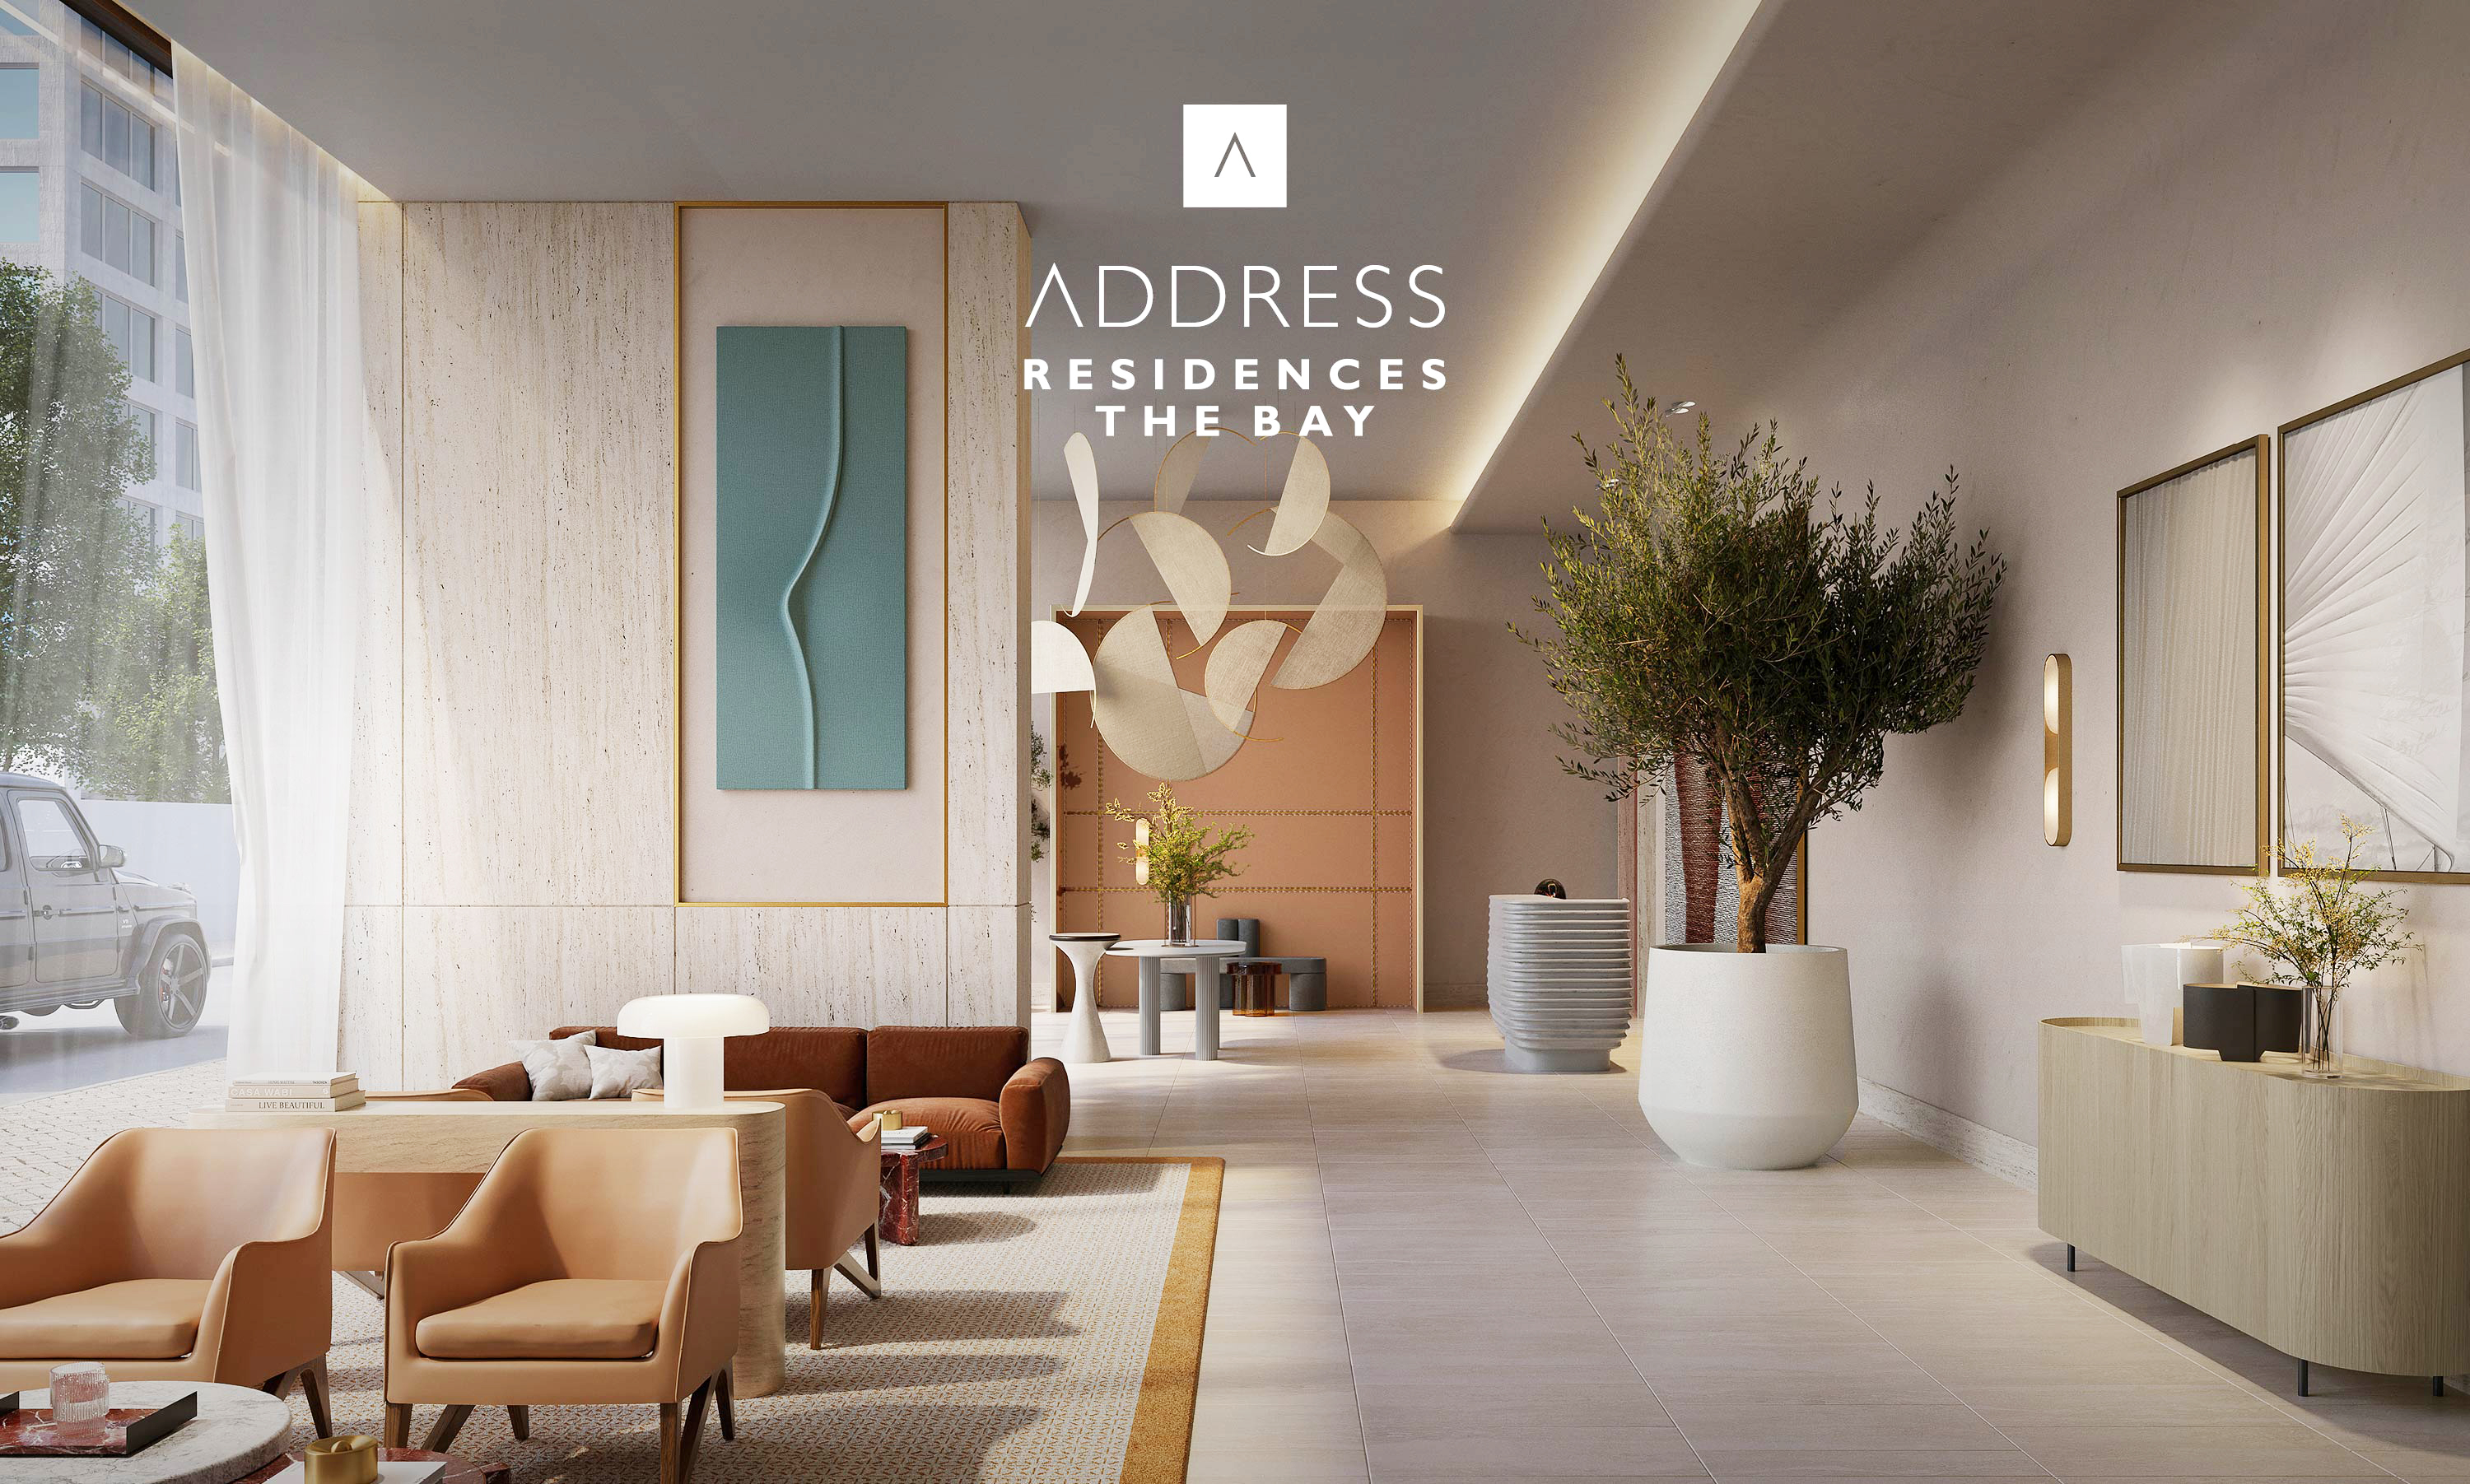 Gallery Address Residences The Bay